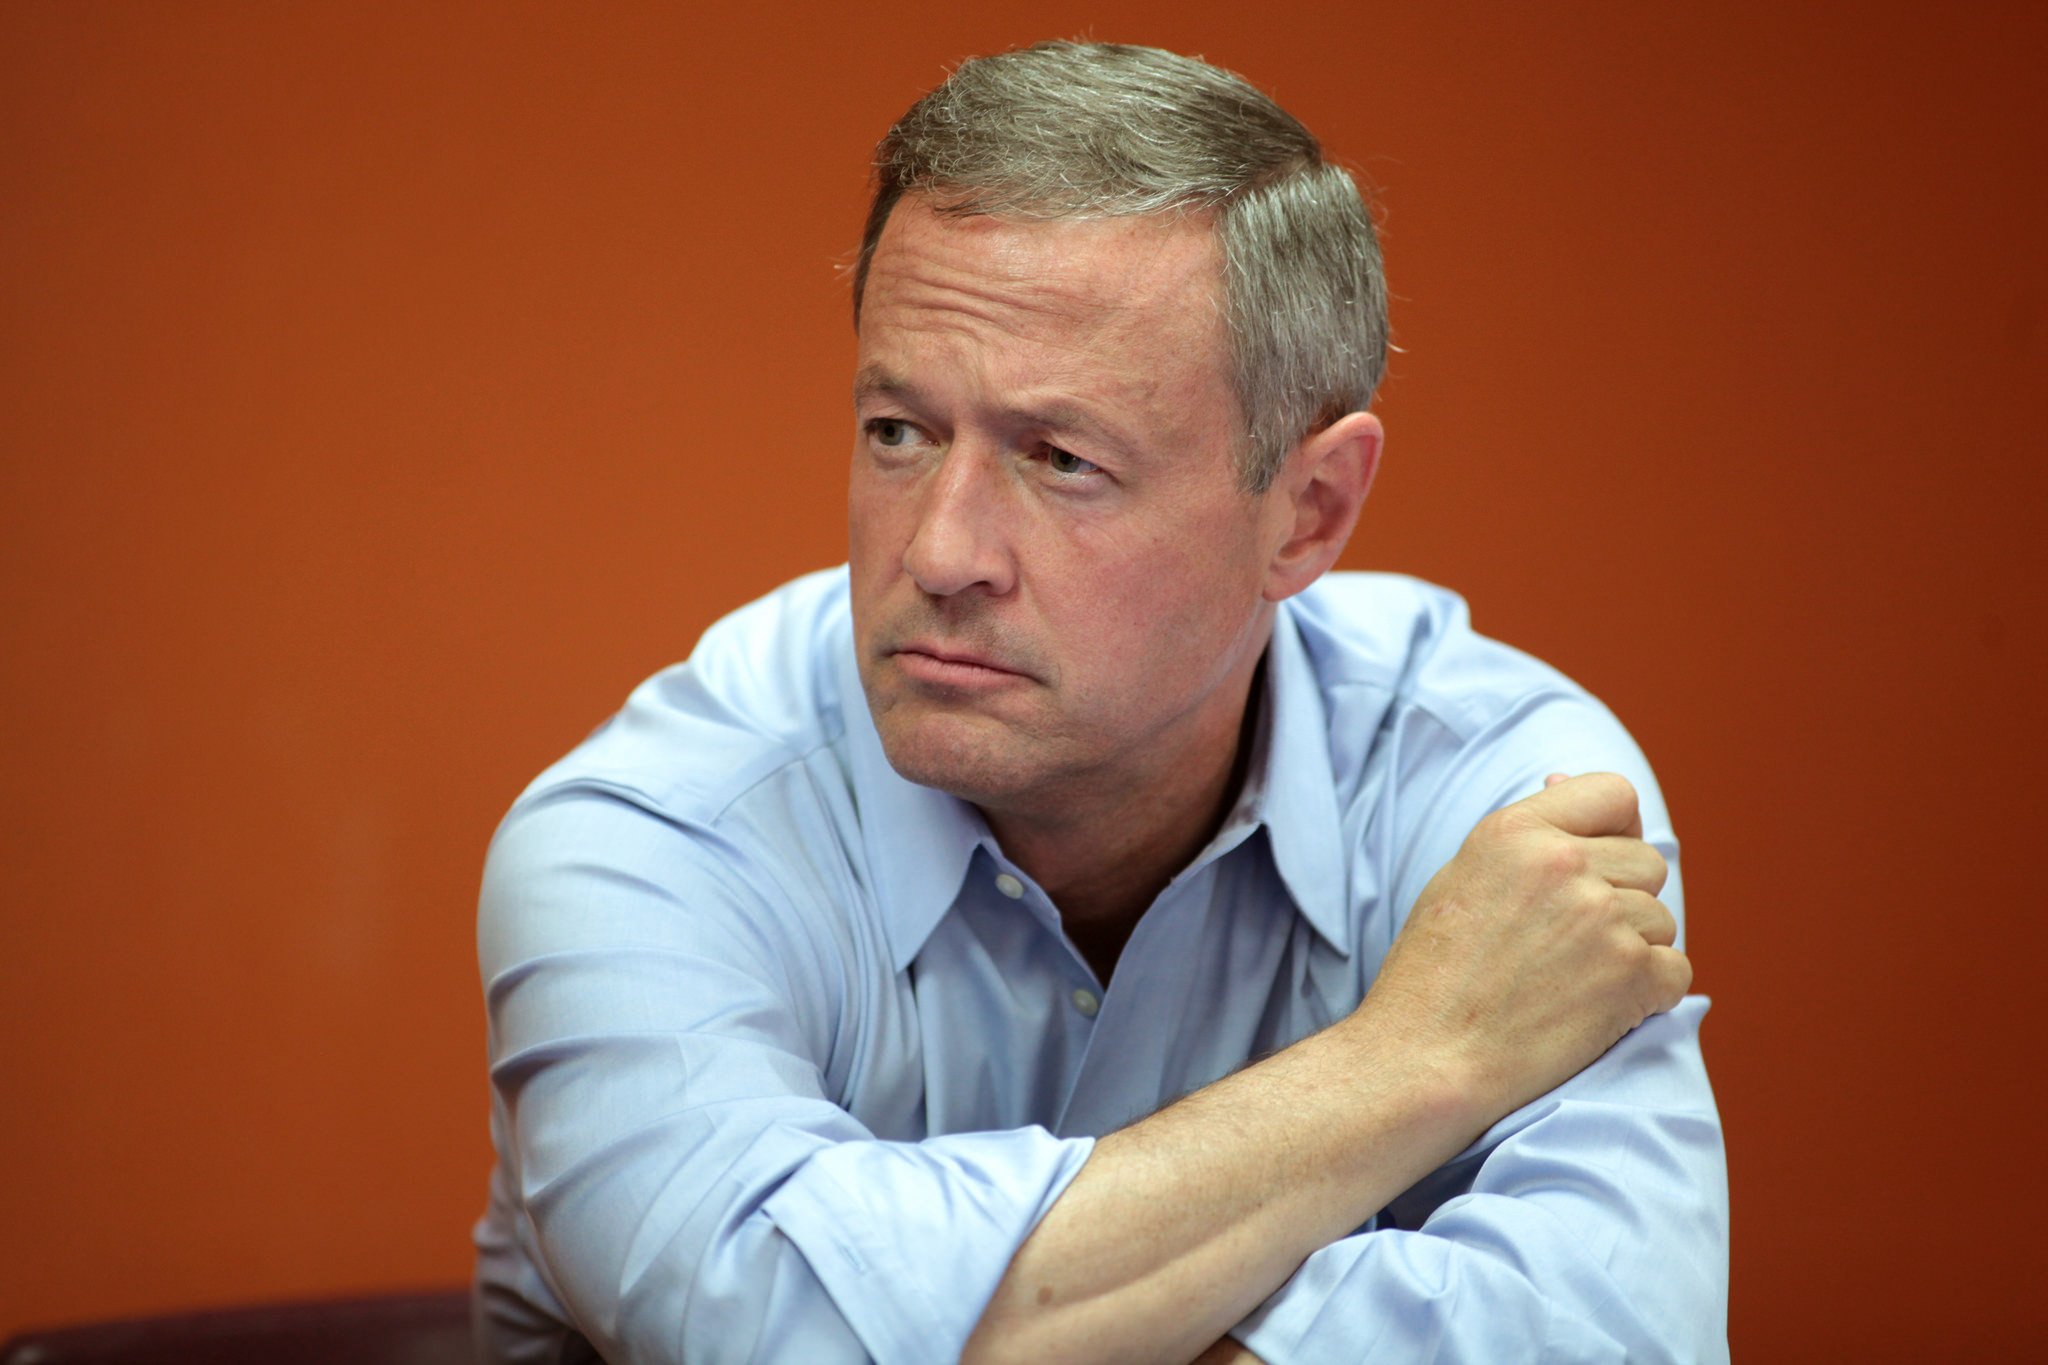 Picture of Martin O'Malley sitting down against an orange background